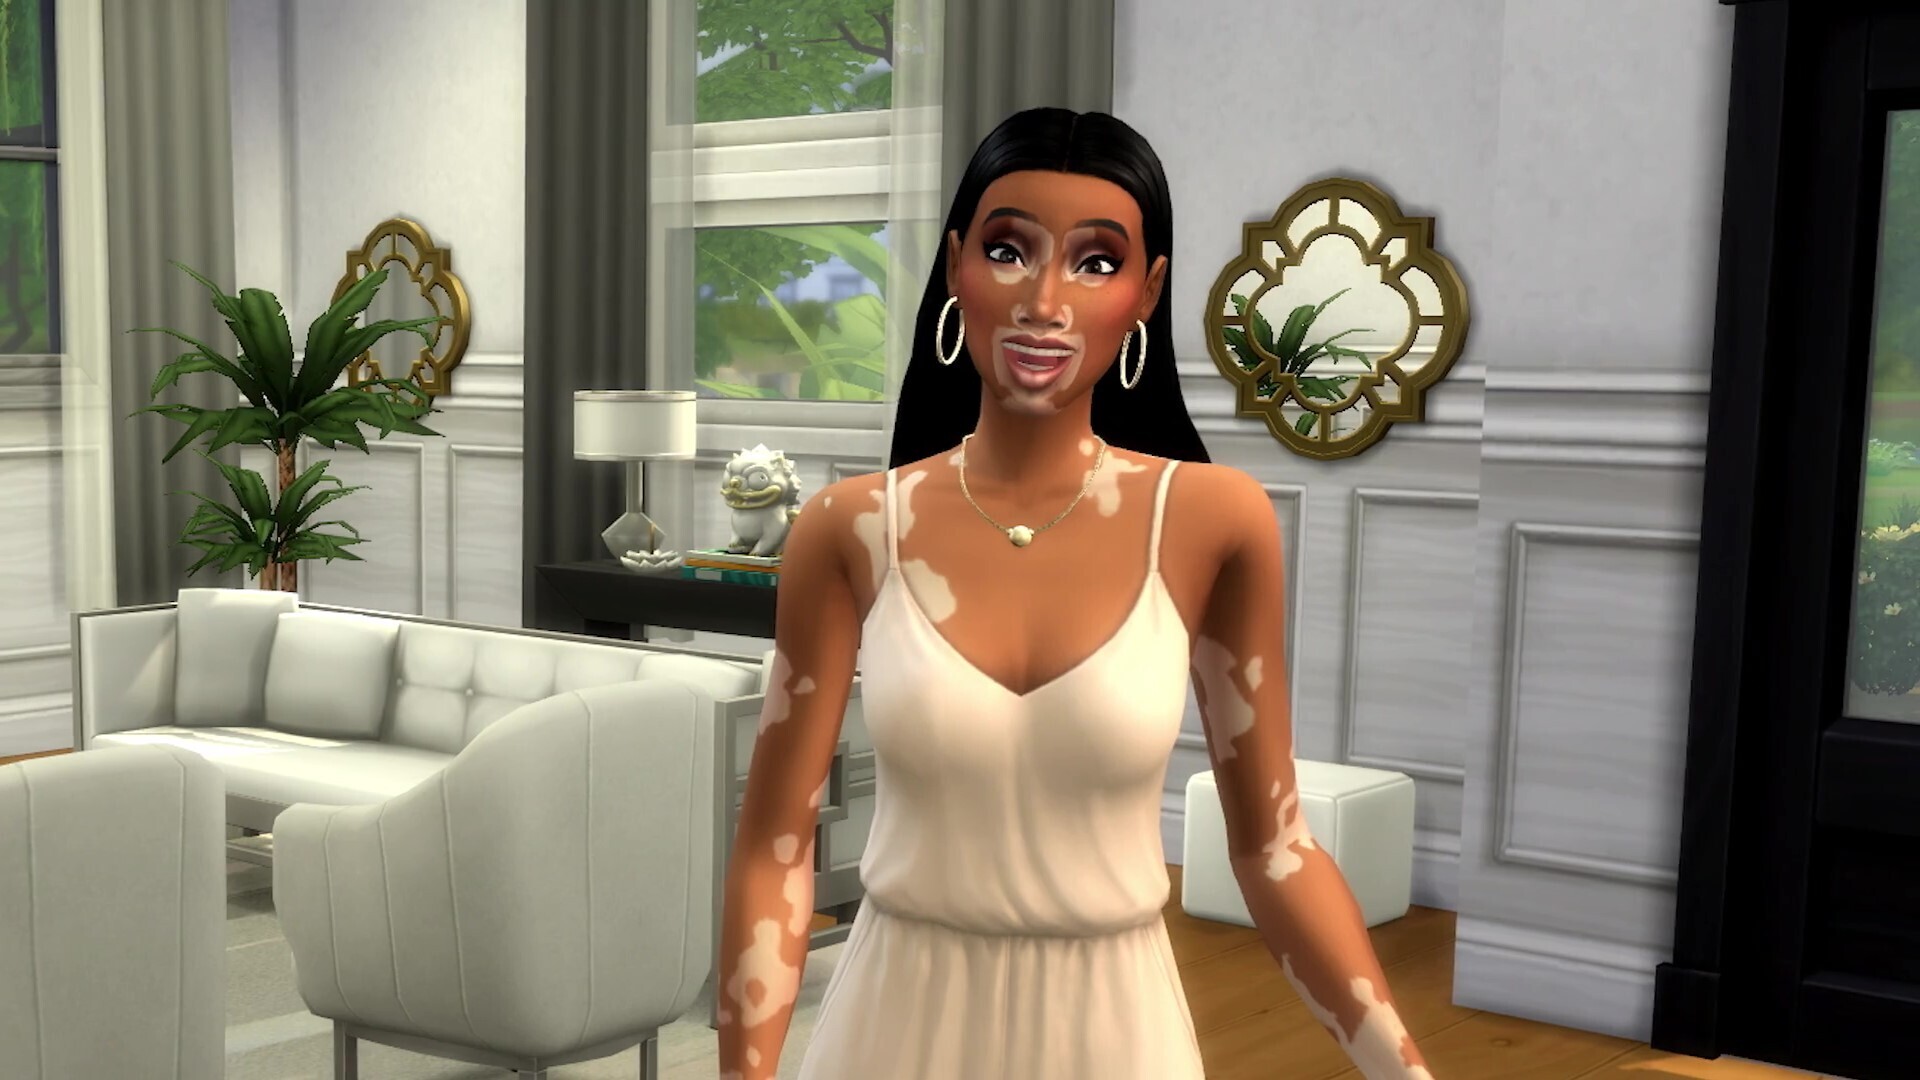 'The Sims 4' Partners With Winnie Harlow For Vitilago Skin Feature